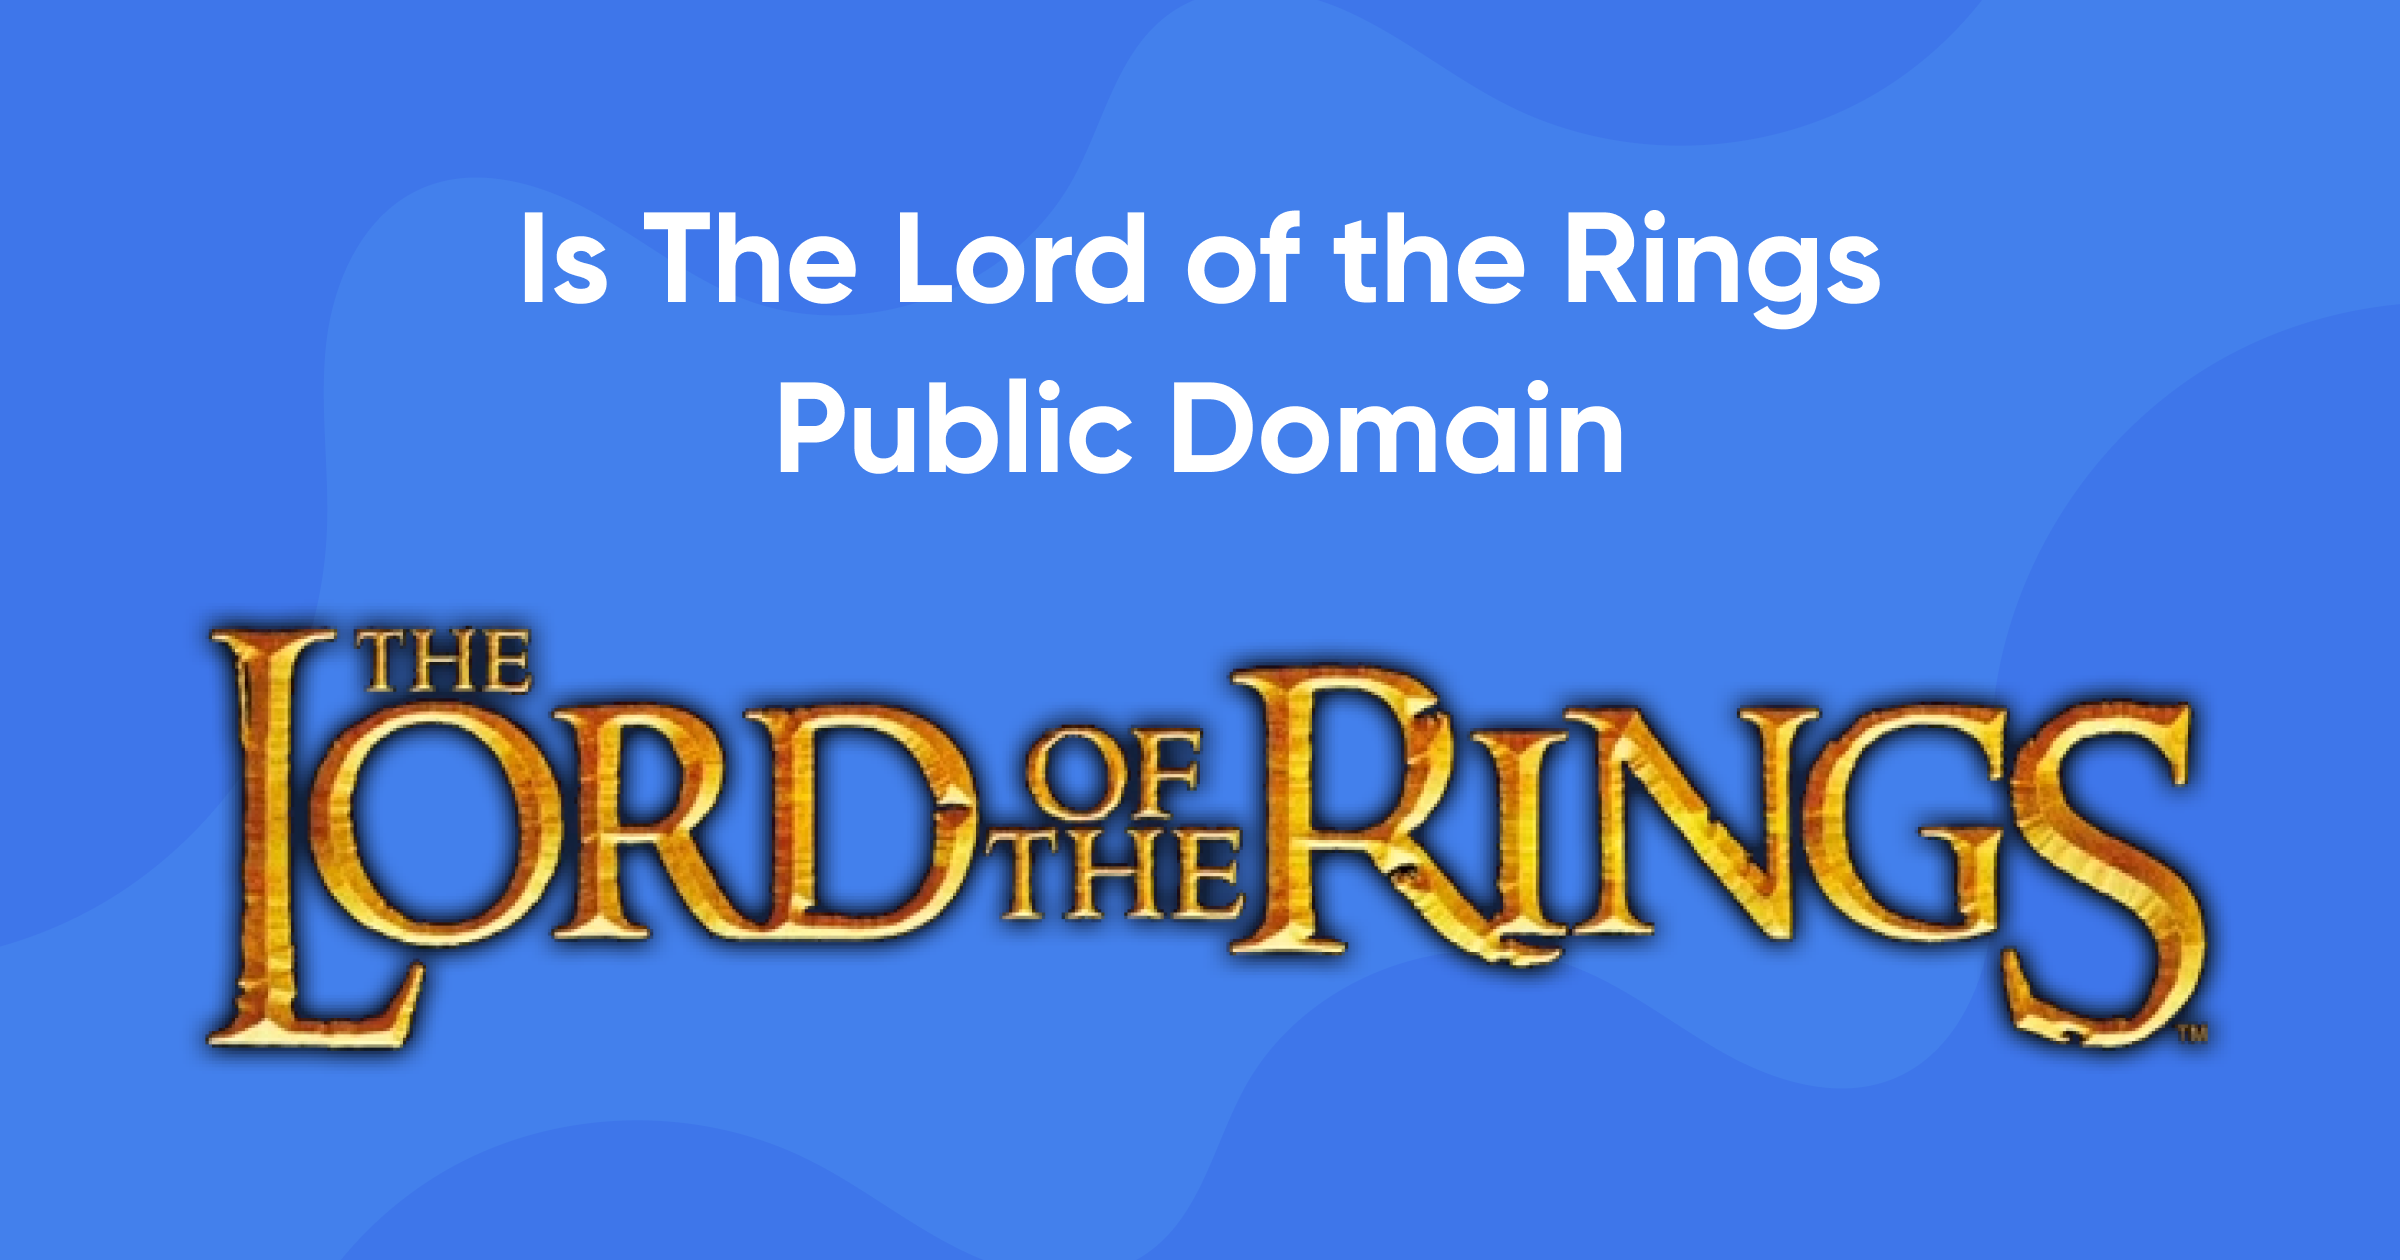 Is The Lord of the Rings Public Domain? (+ Should We Expect LOTR Copies?)